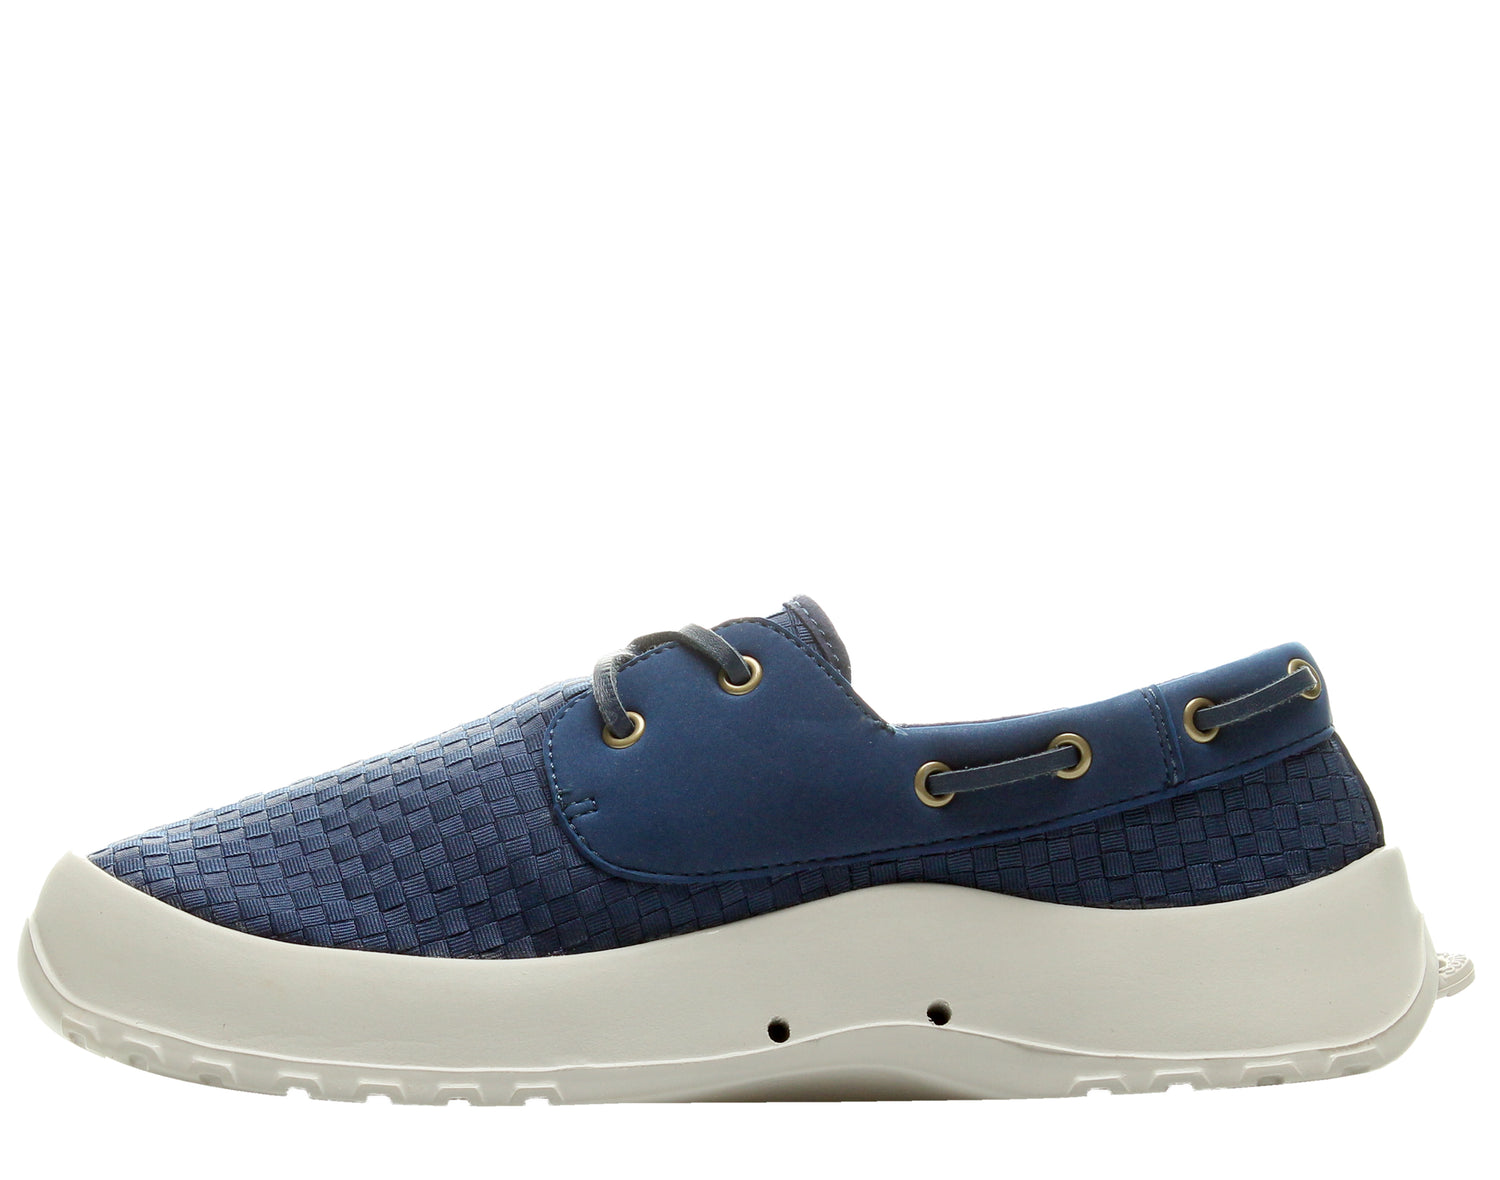 SoftScience Cruise Men's Lace Up Boat Shoes